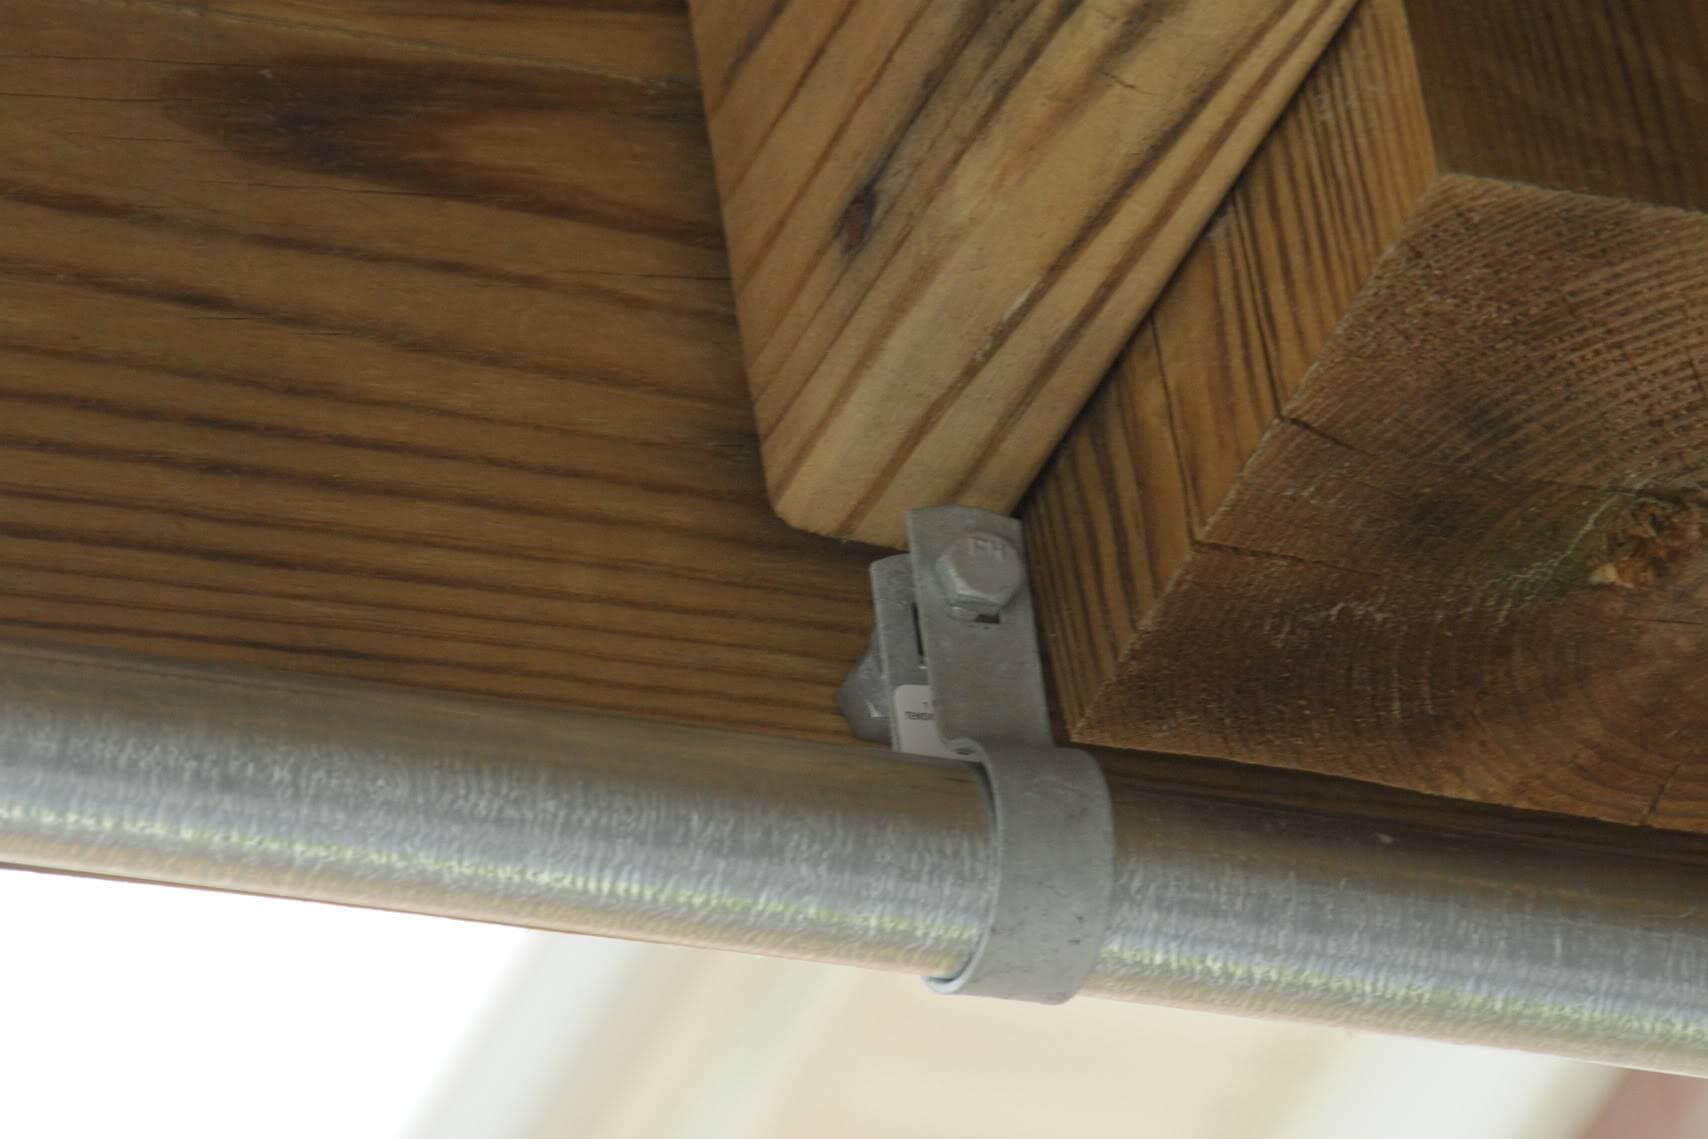 close up of chain link fencing curtain rod attached to wood deck